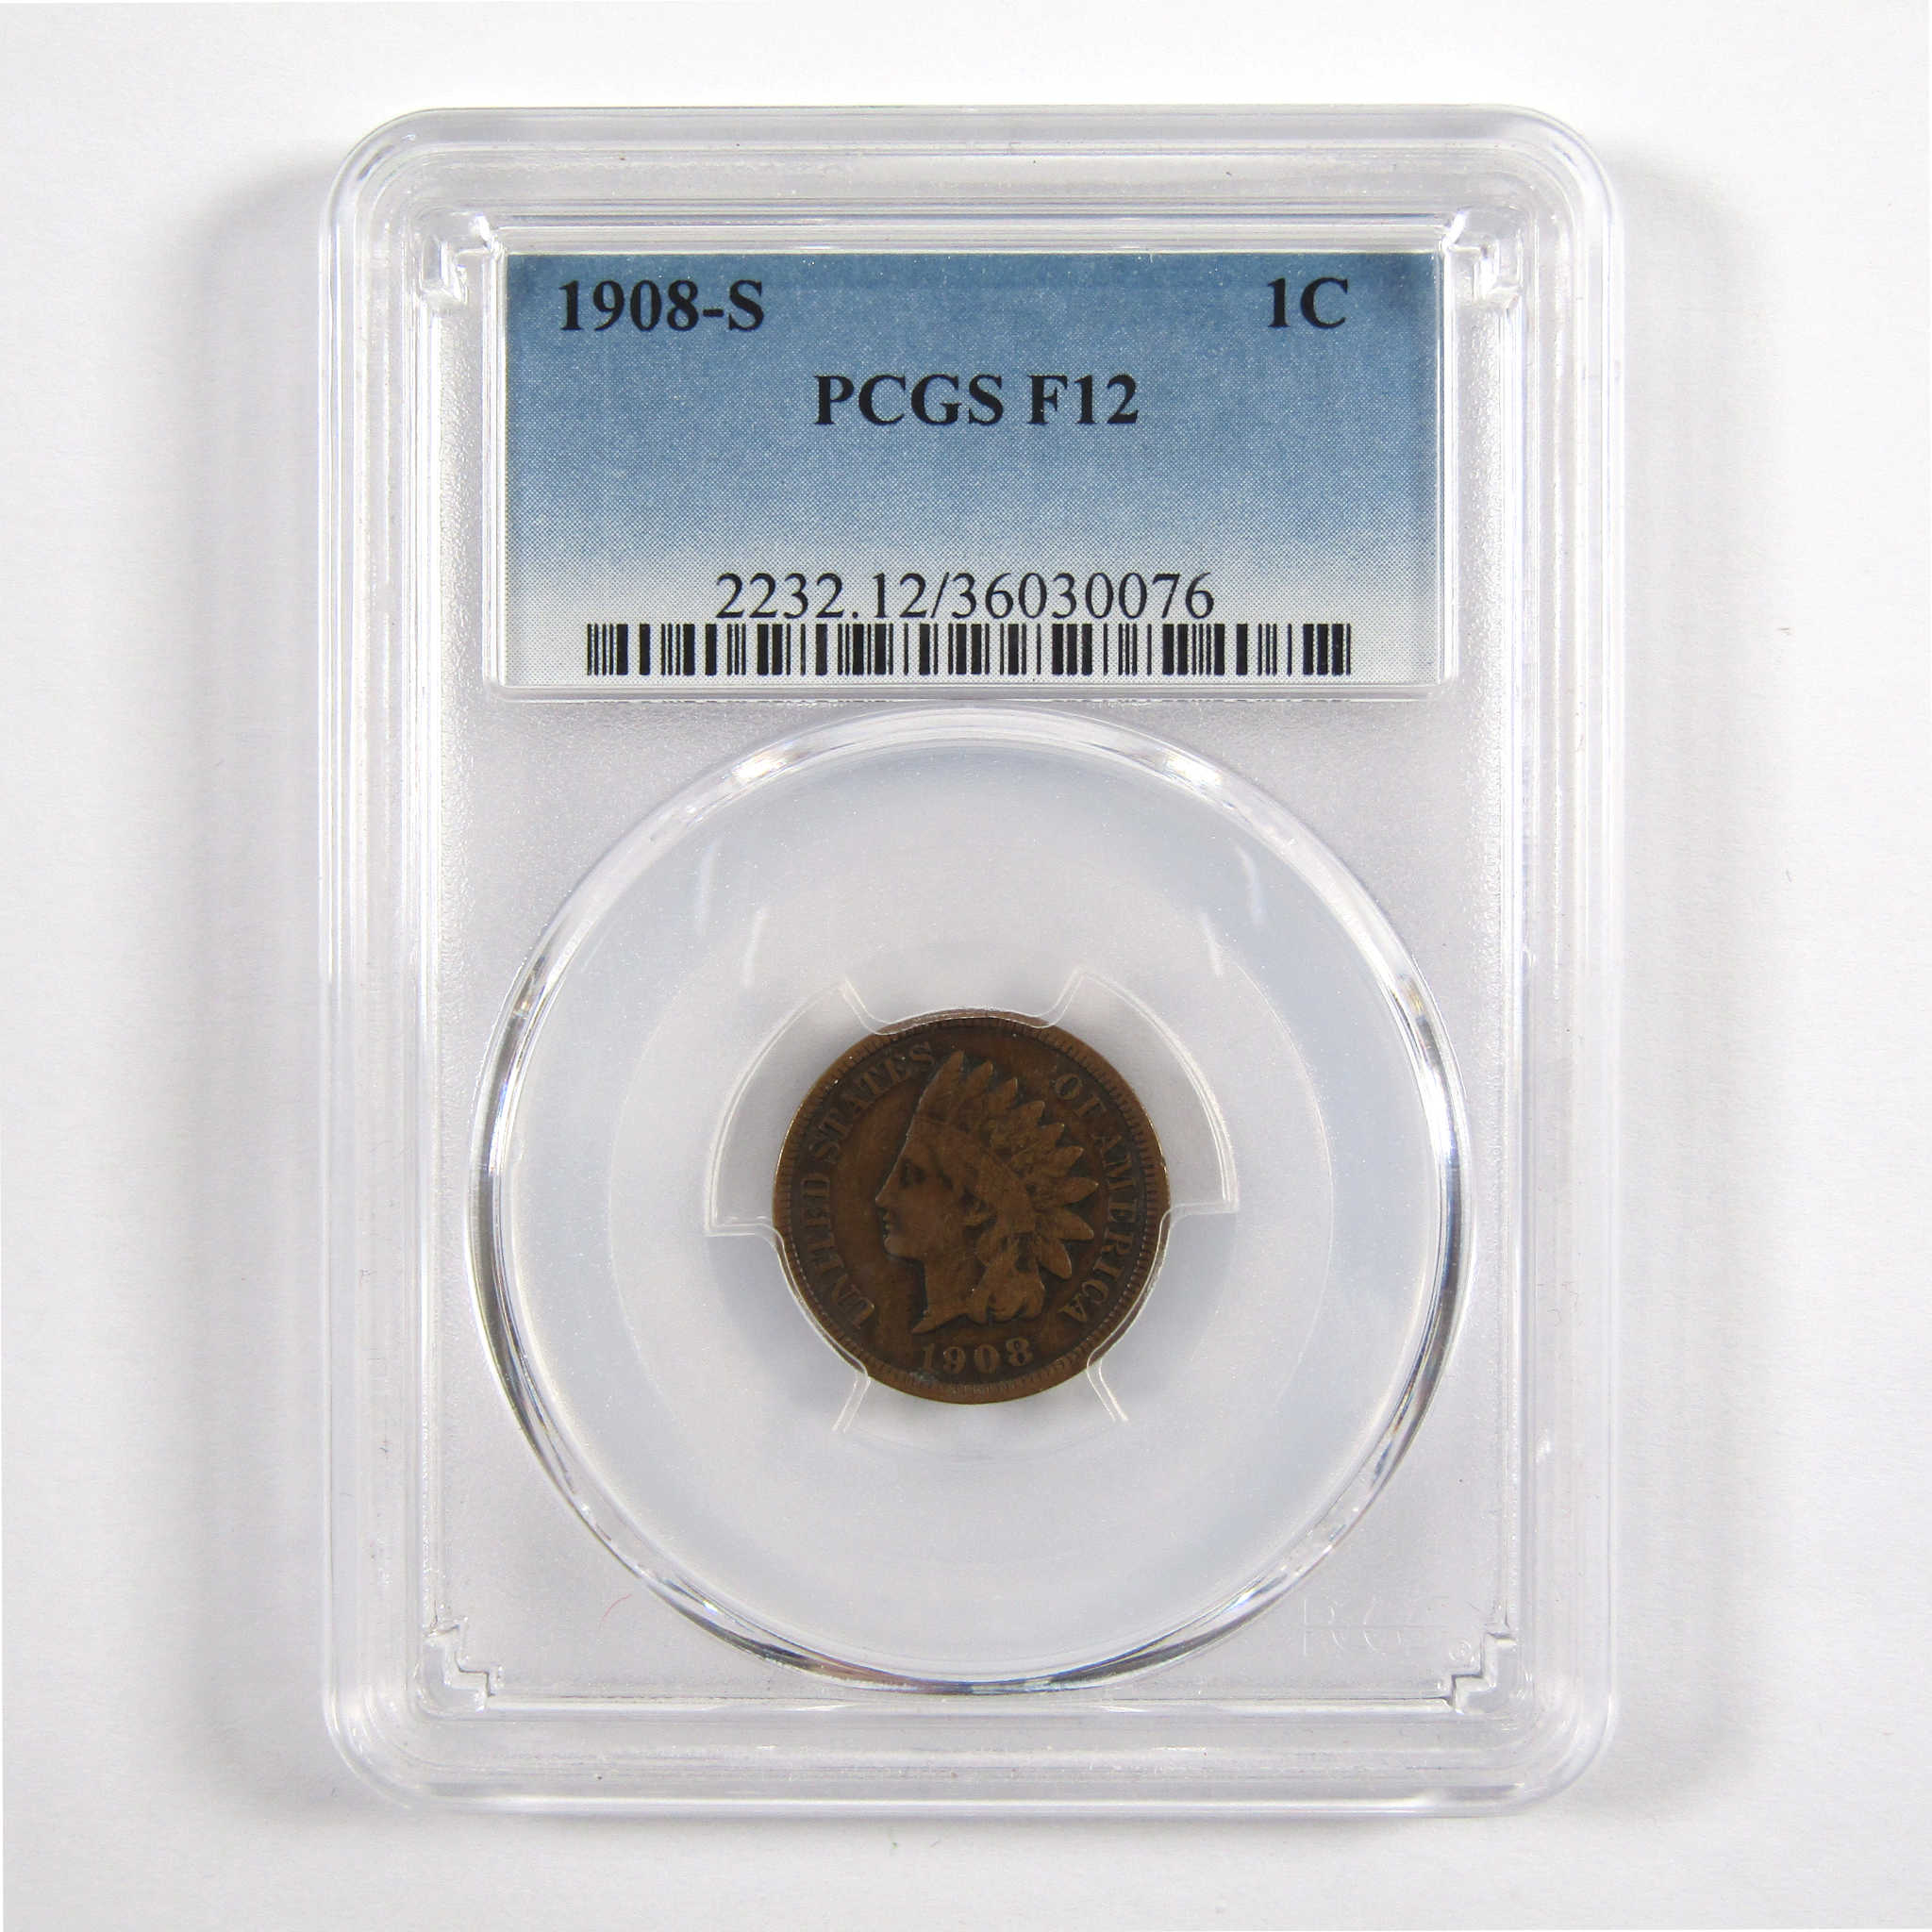 1908 S Indian Head Cent F 12 PCGS Penny 1c Coin SKU:I11080